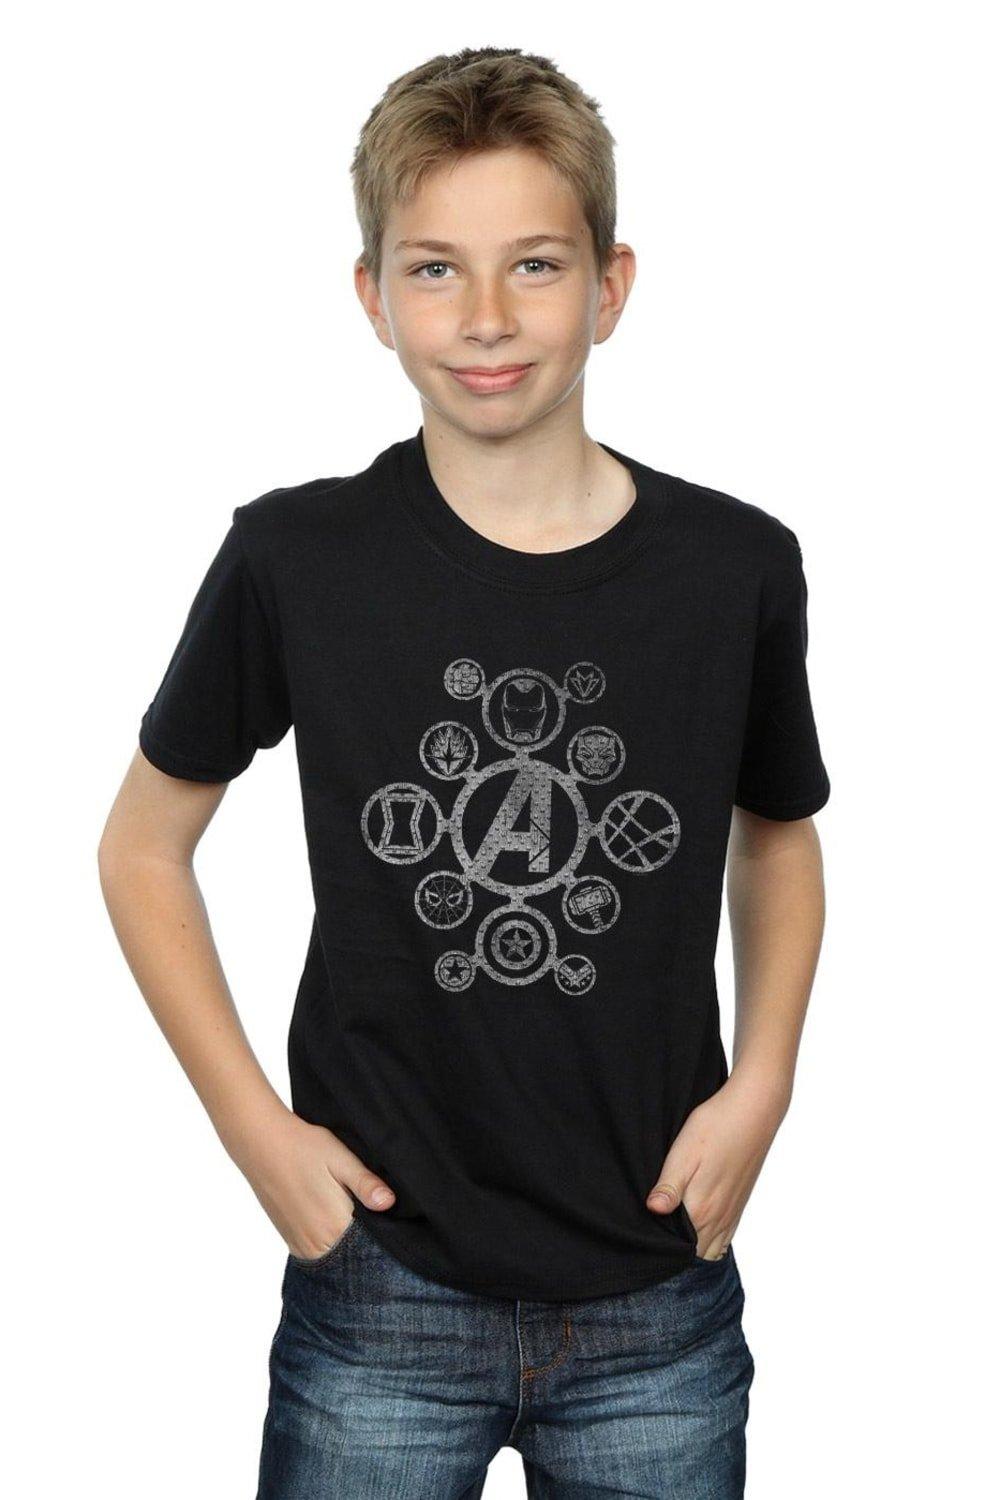 Avengers Infinity War Distressed Metal Icons T-Shirt